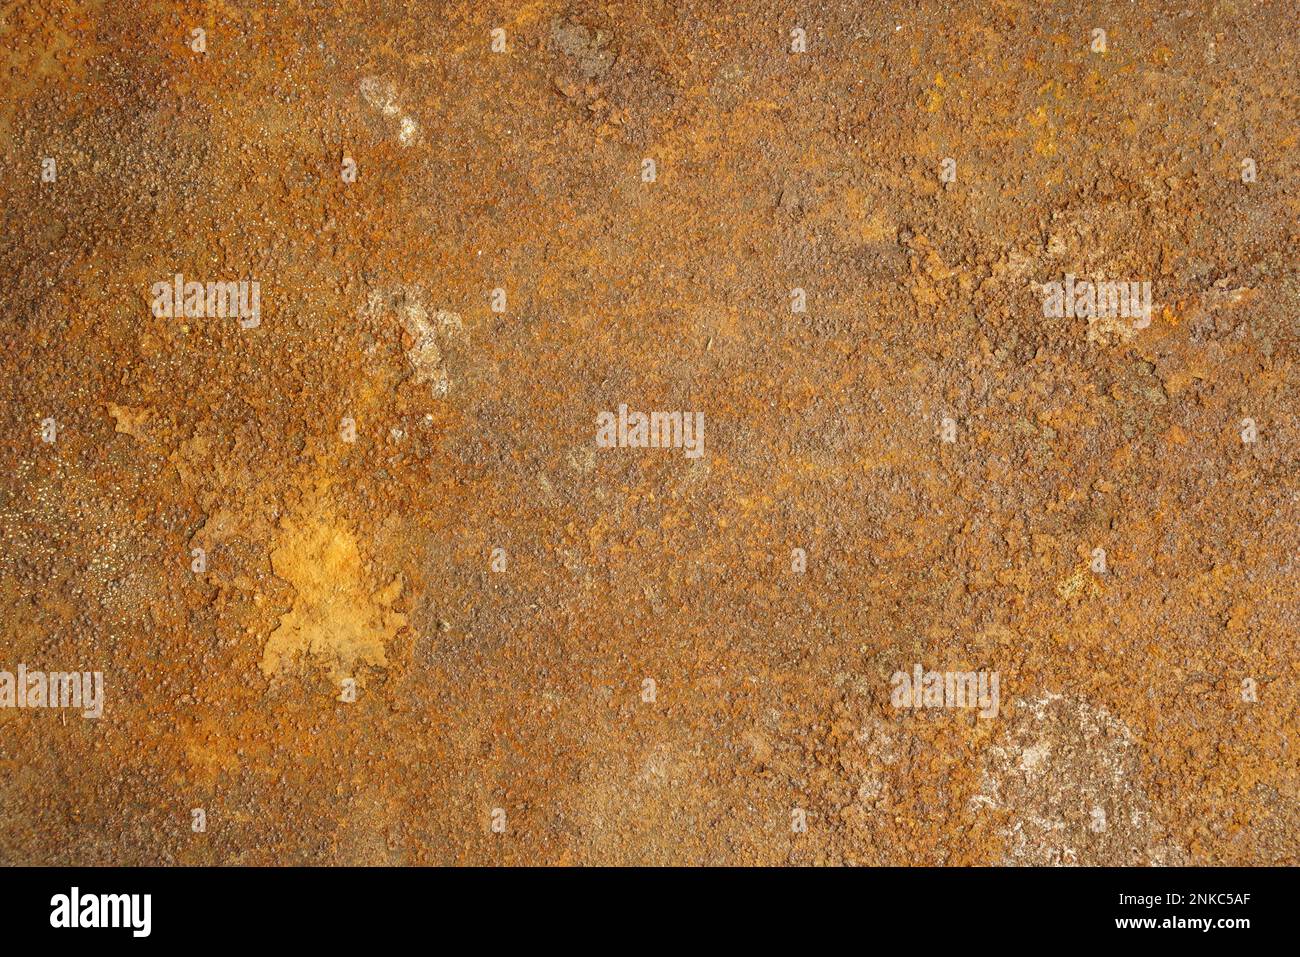 Textured metal surface with detailed traces of corrosion and rust Stock Photo